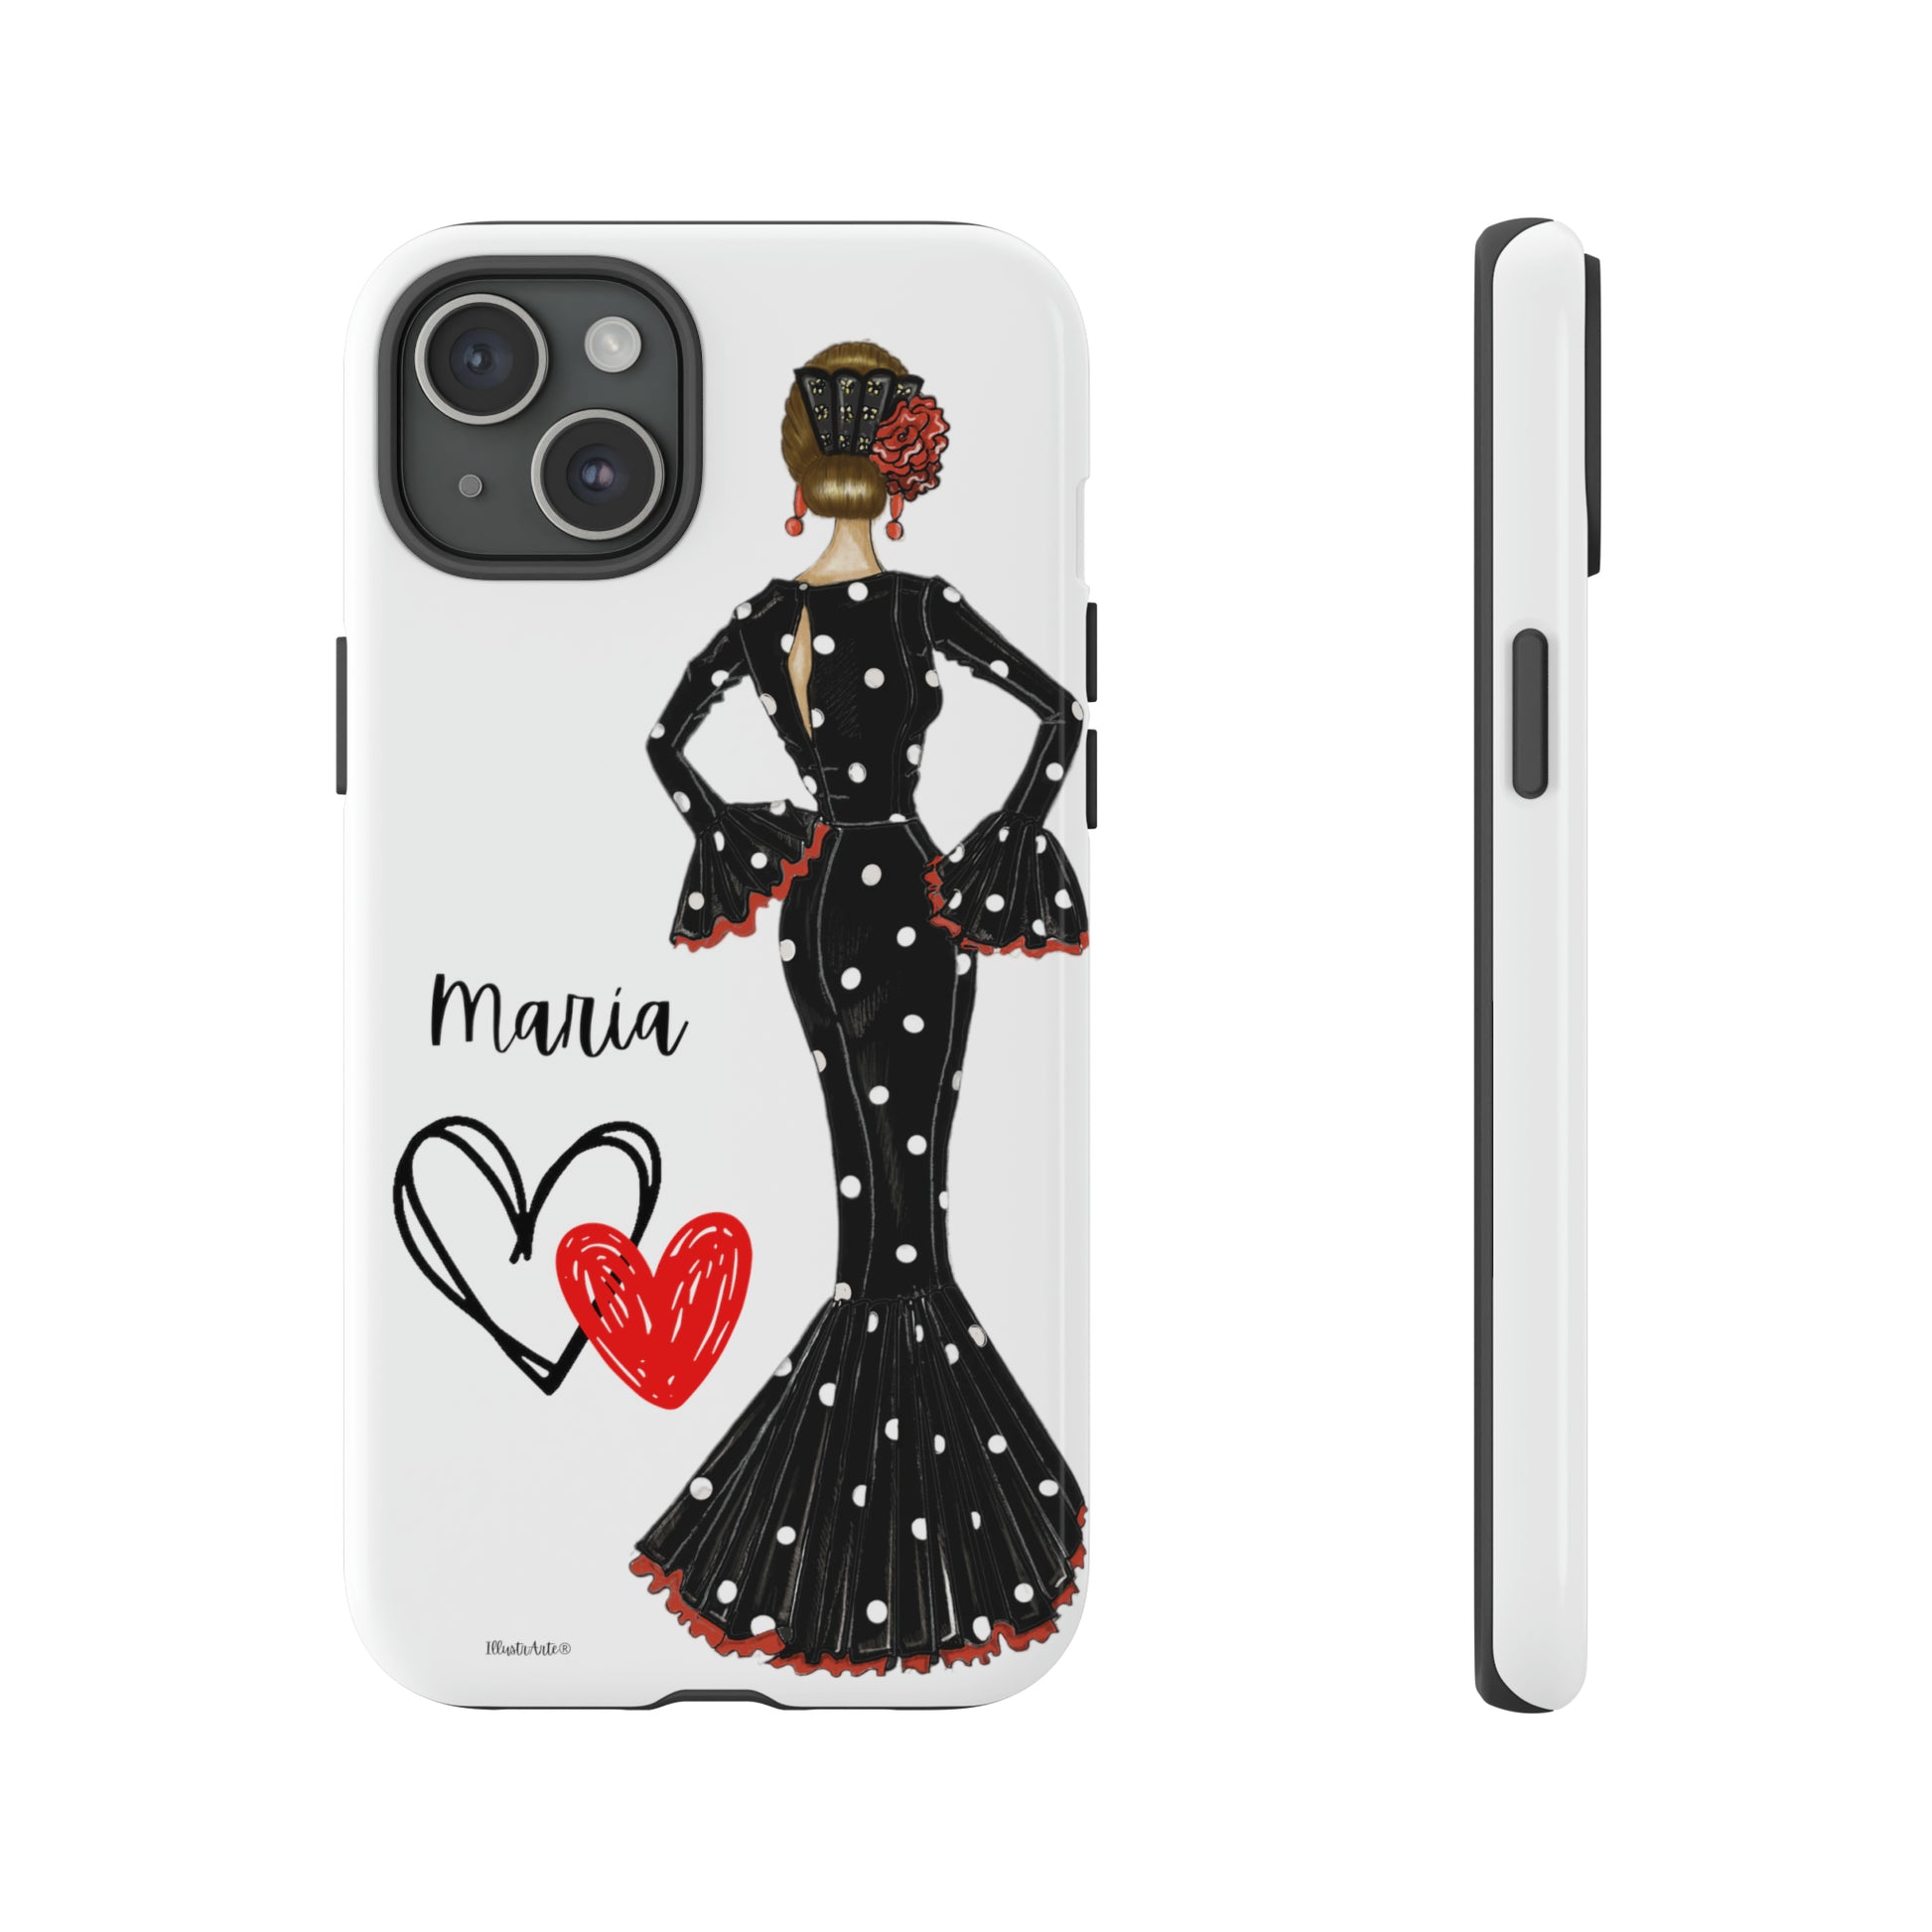 a phone case with an image of a woman in a dress